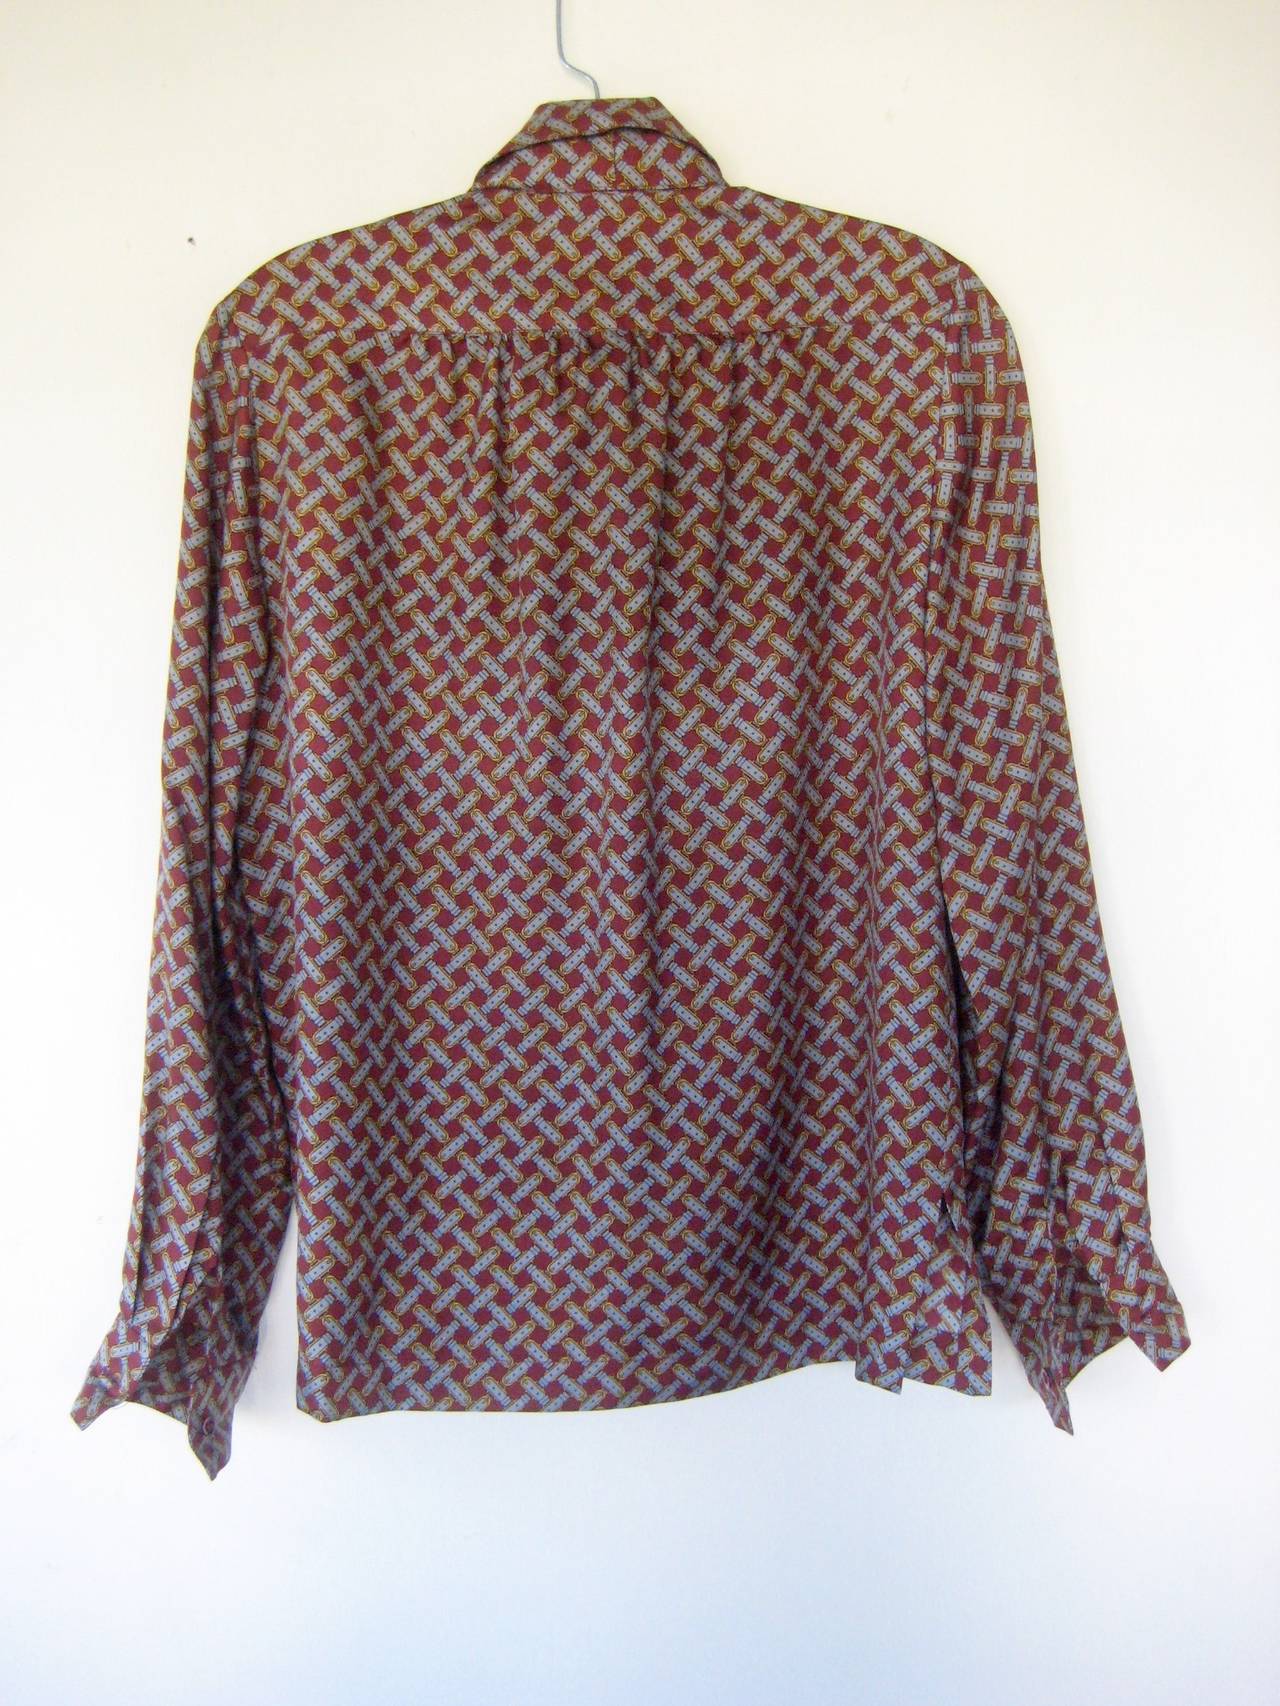 Vintage Hermes Buckle Print Blouse with Matching Twilly Tie In Excellent Condition For Sale In Chicago, IL